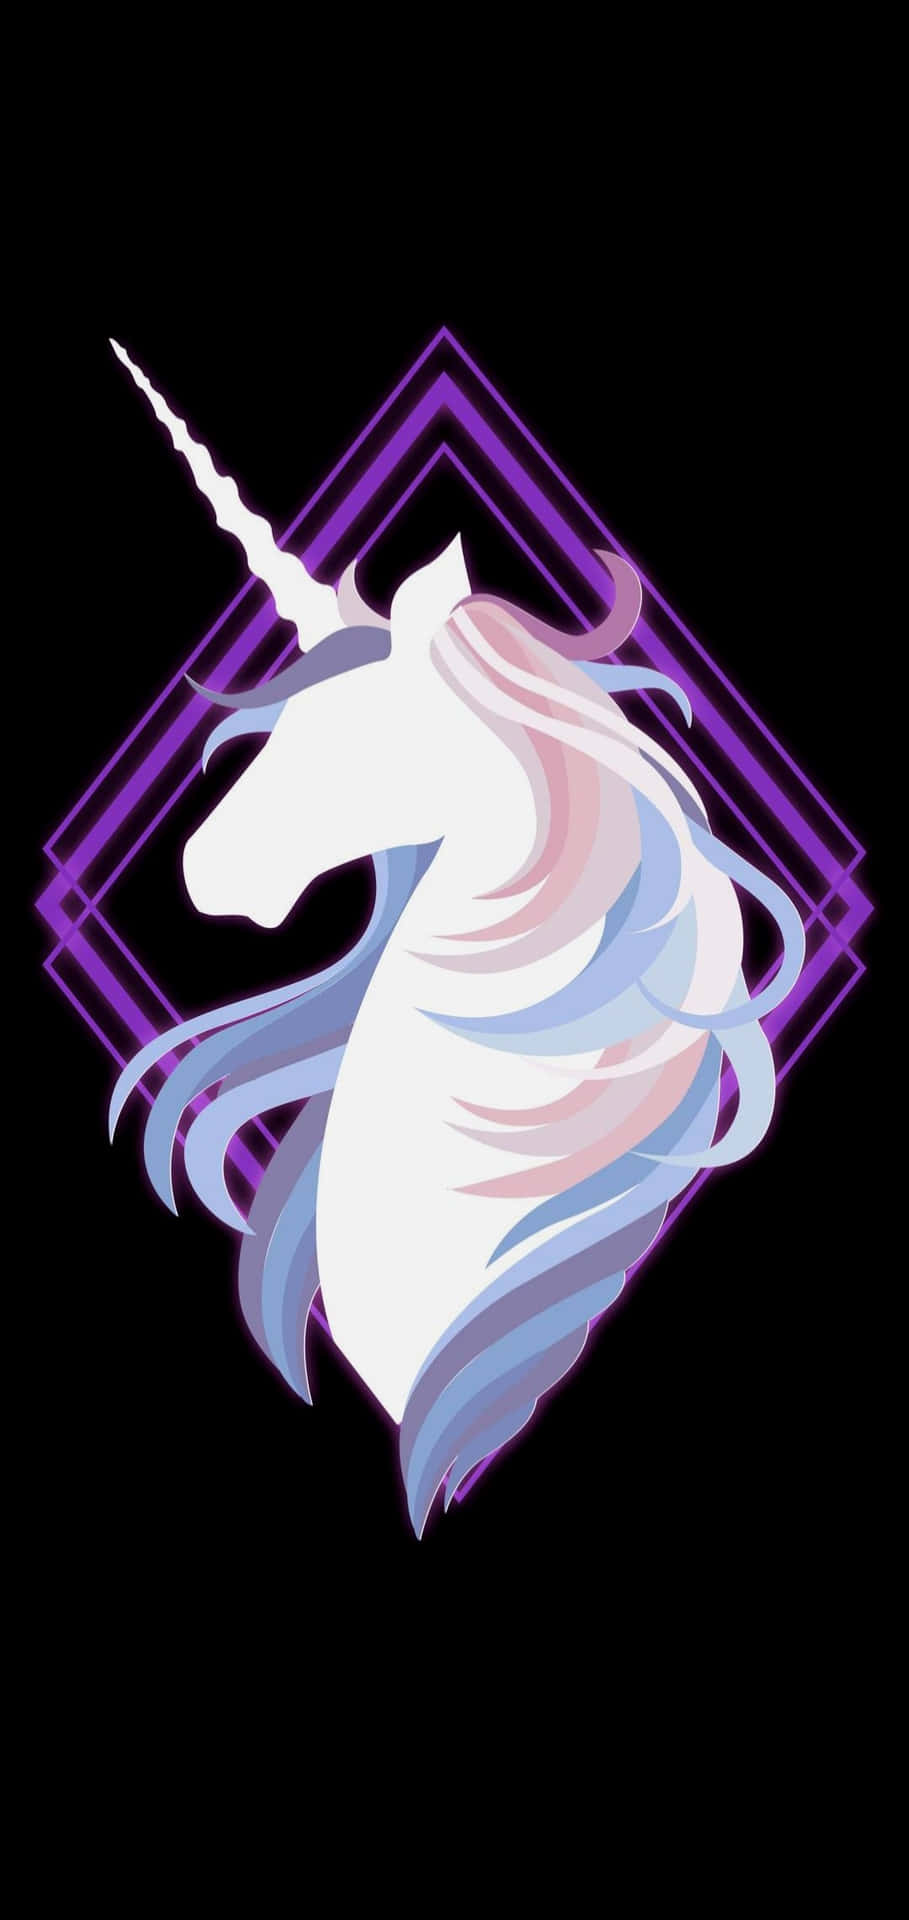 Believe Your Wildest Dreams With A Purple Unicorn! Wallpaper